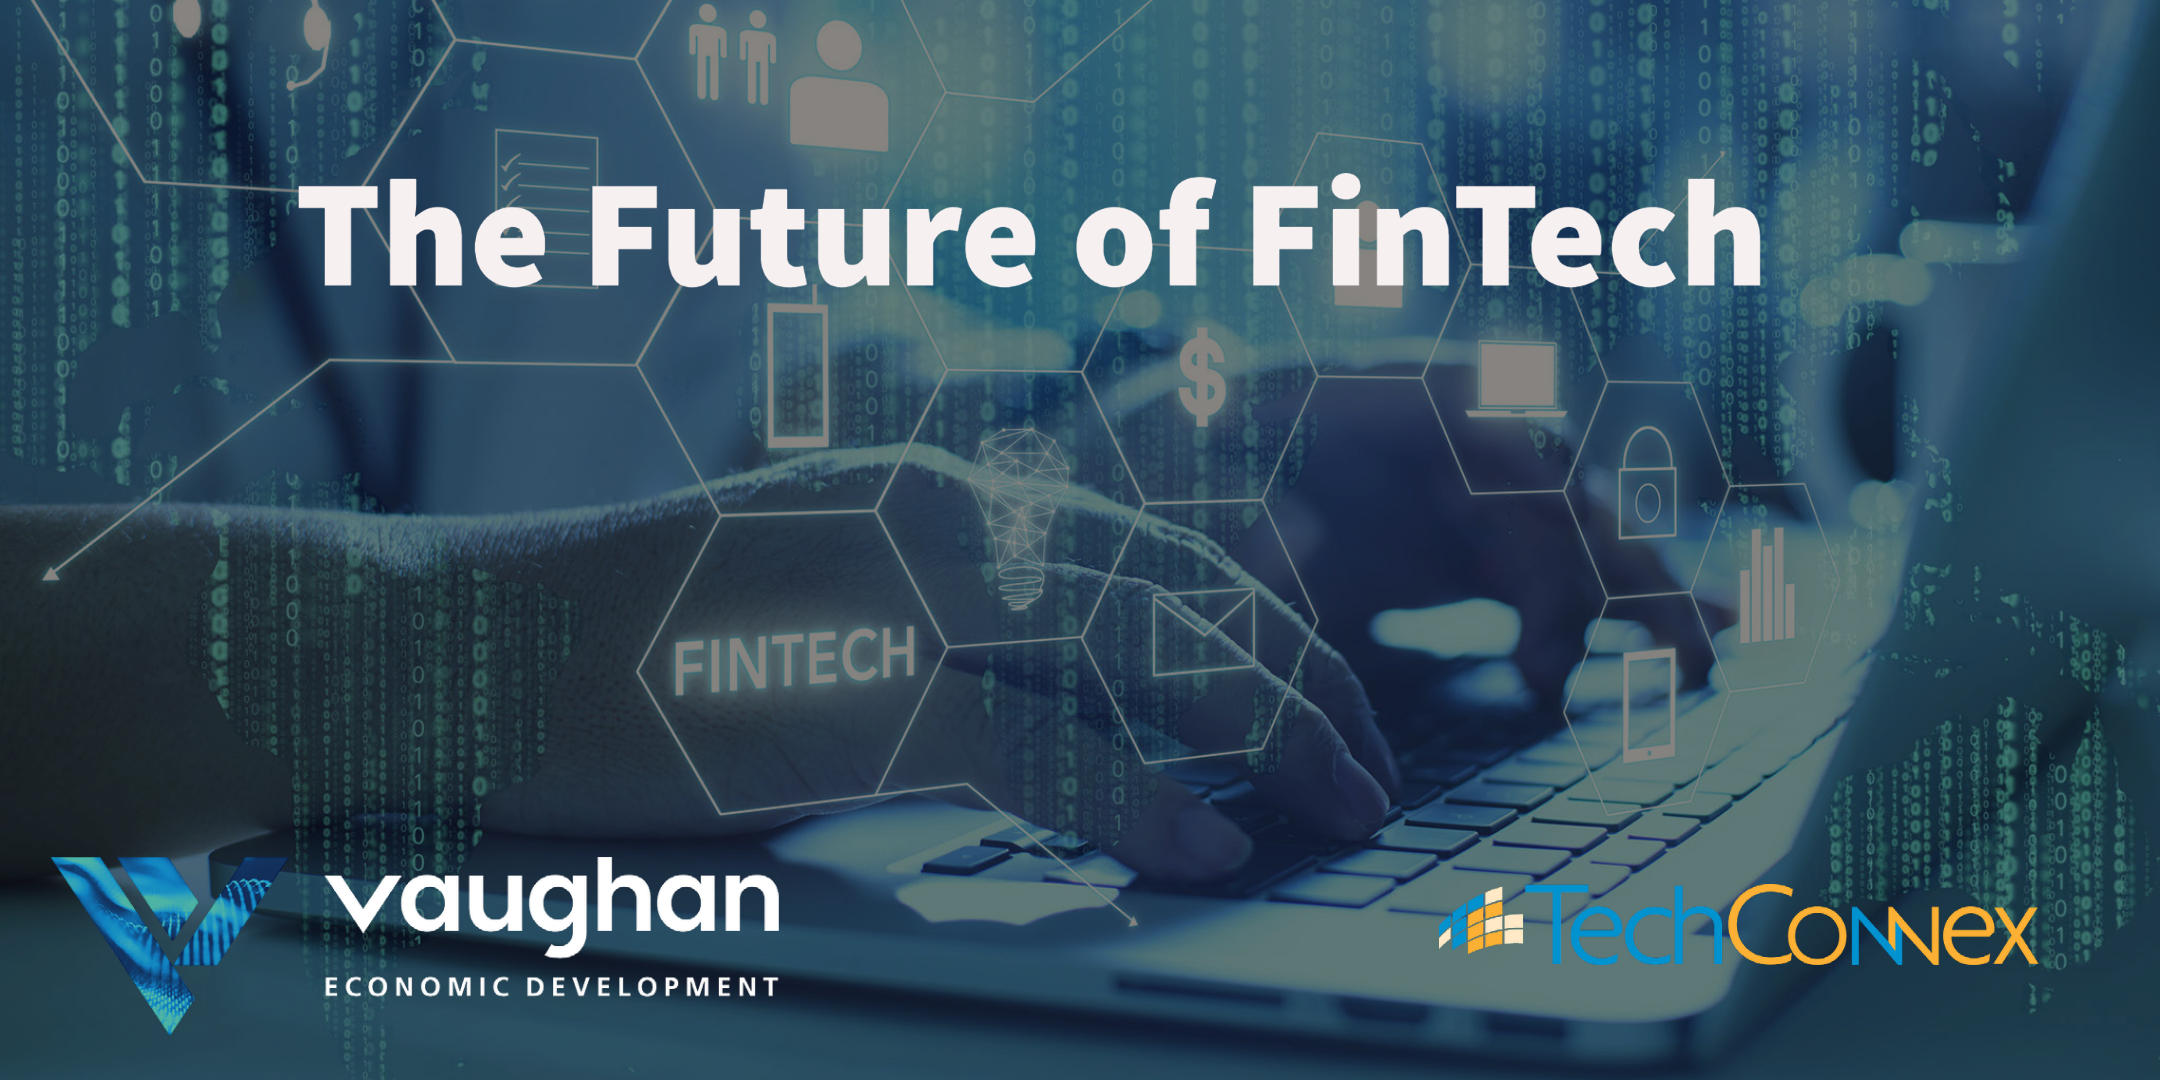 The Future of Fintech